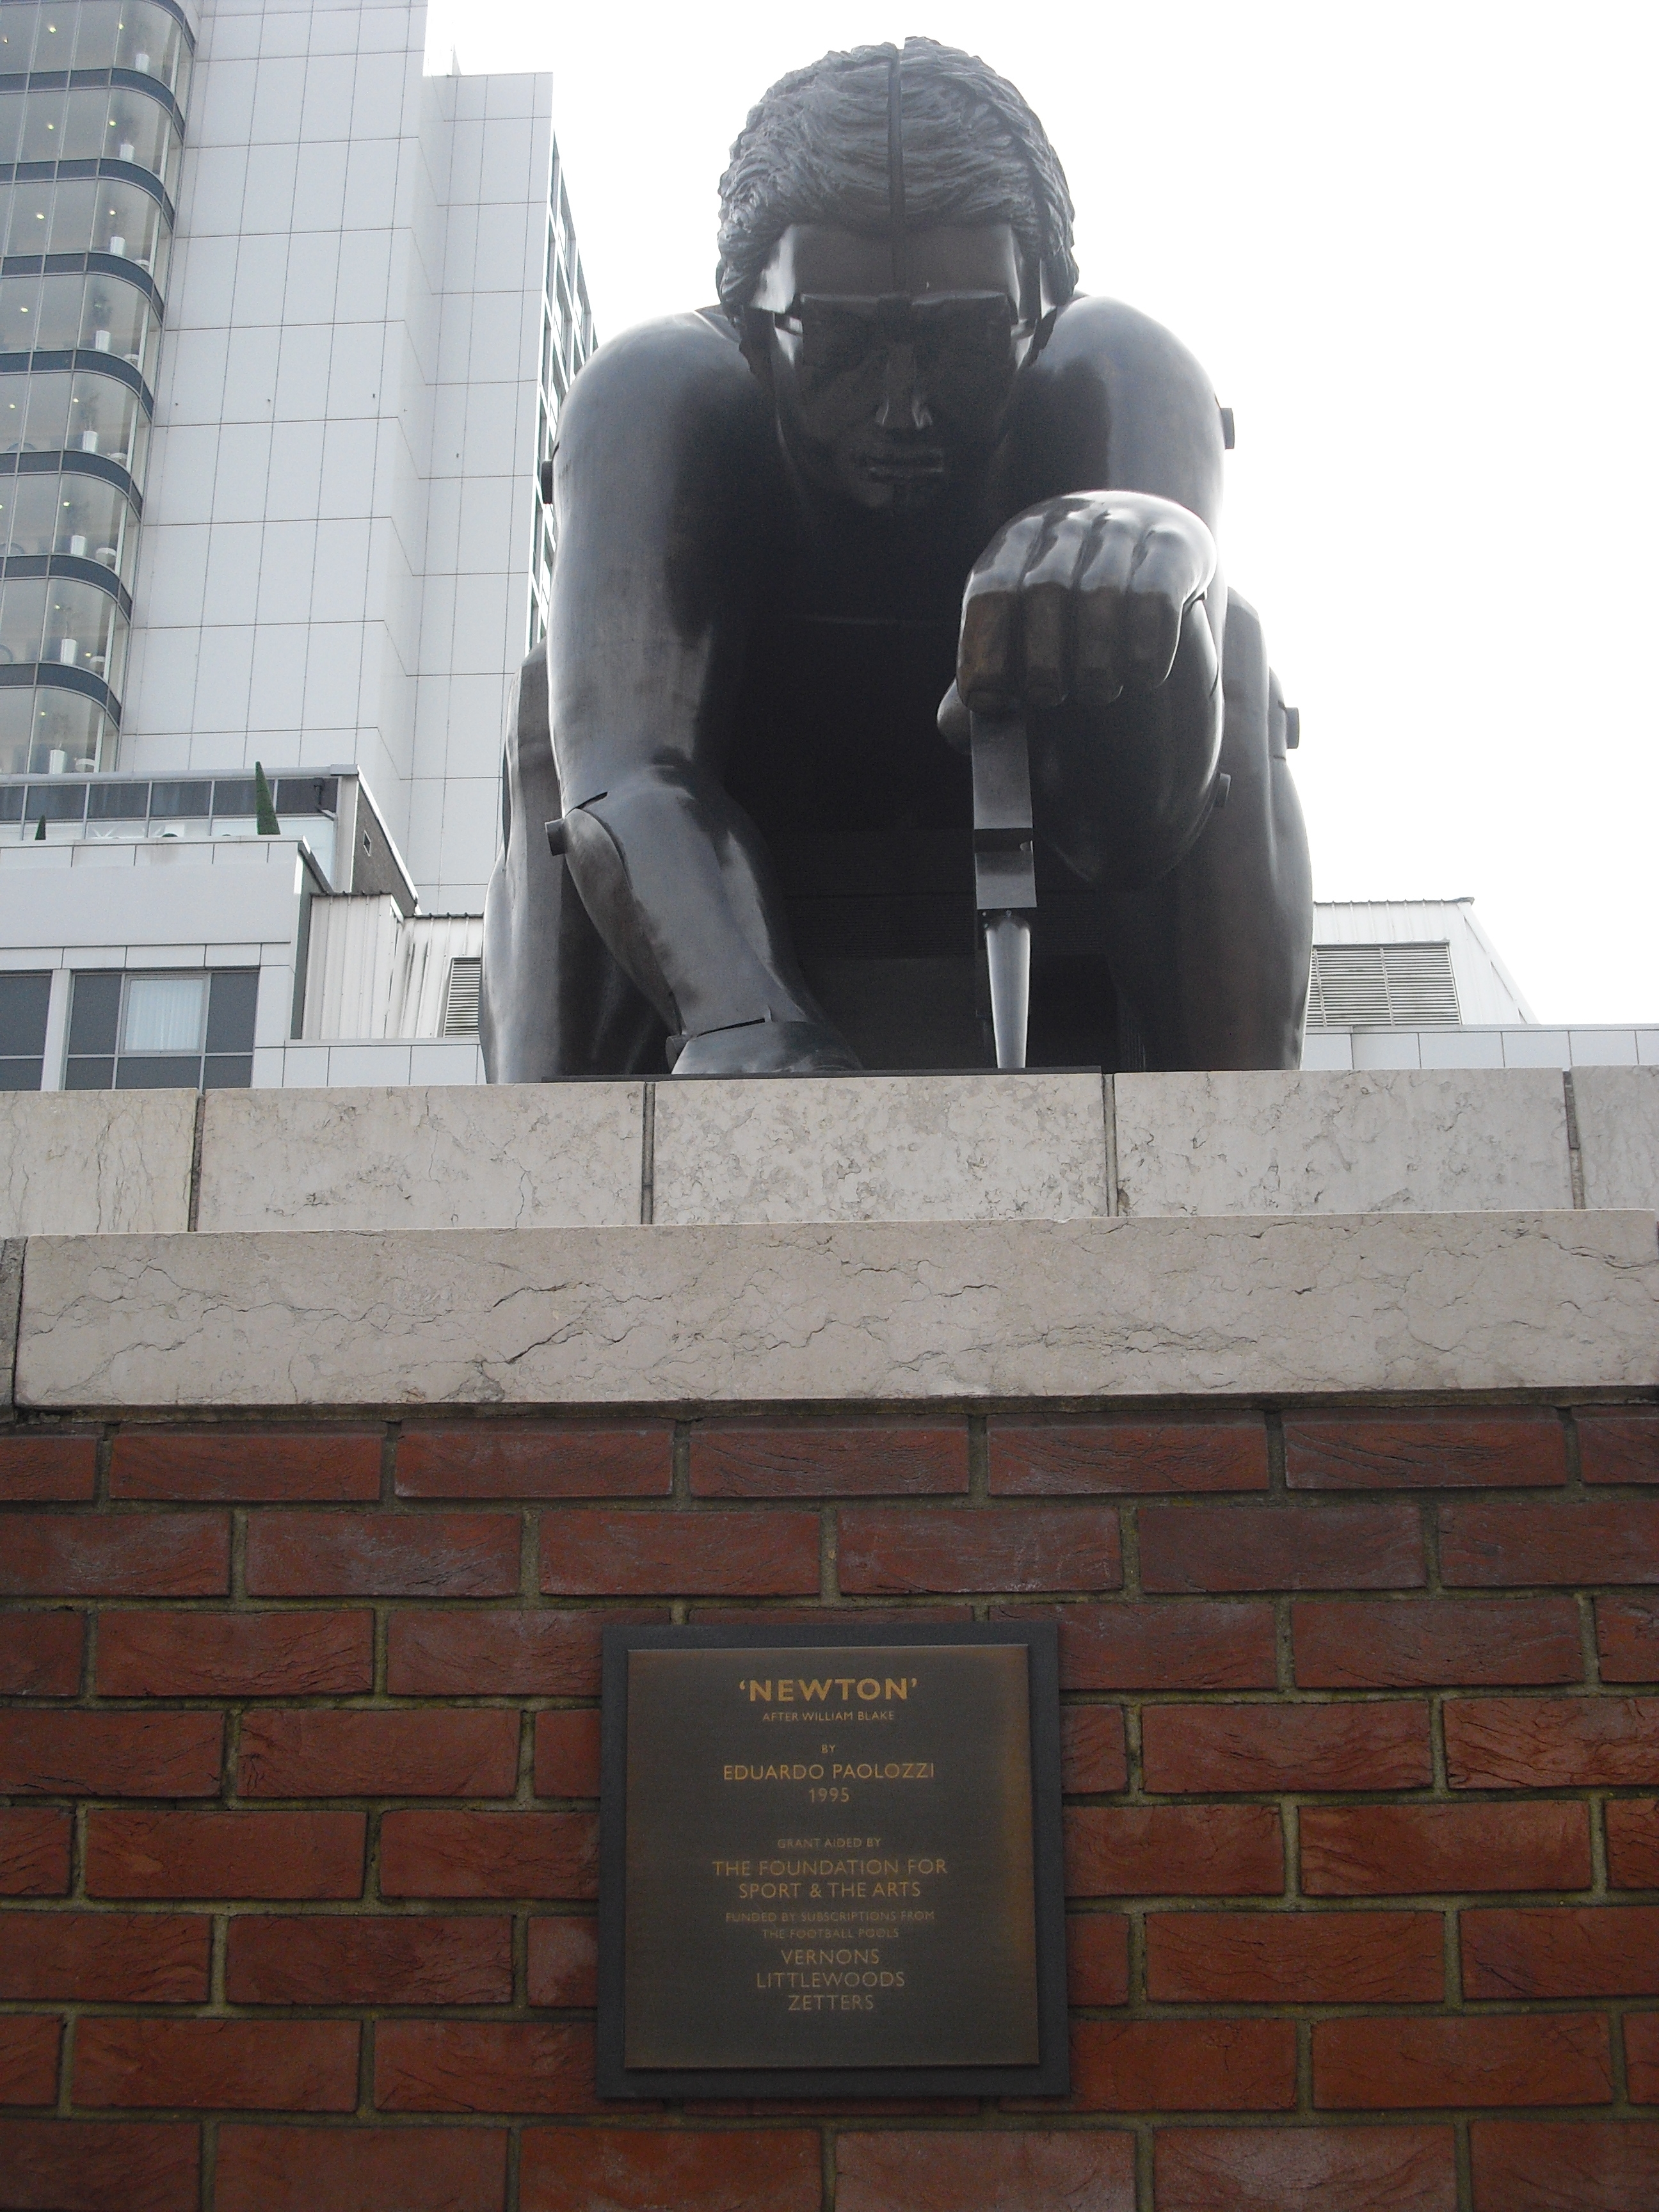 STATUE IN THE BRITISH LIBRARY2 3 3 2010